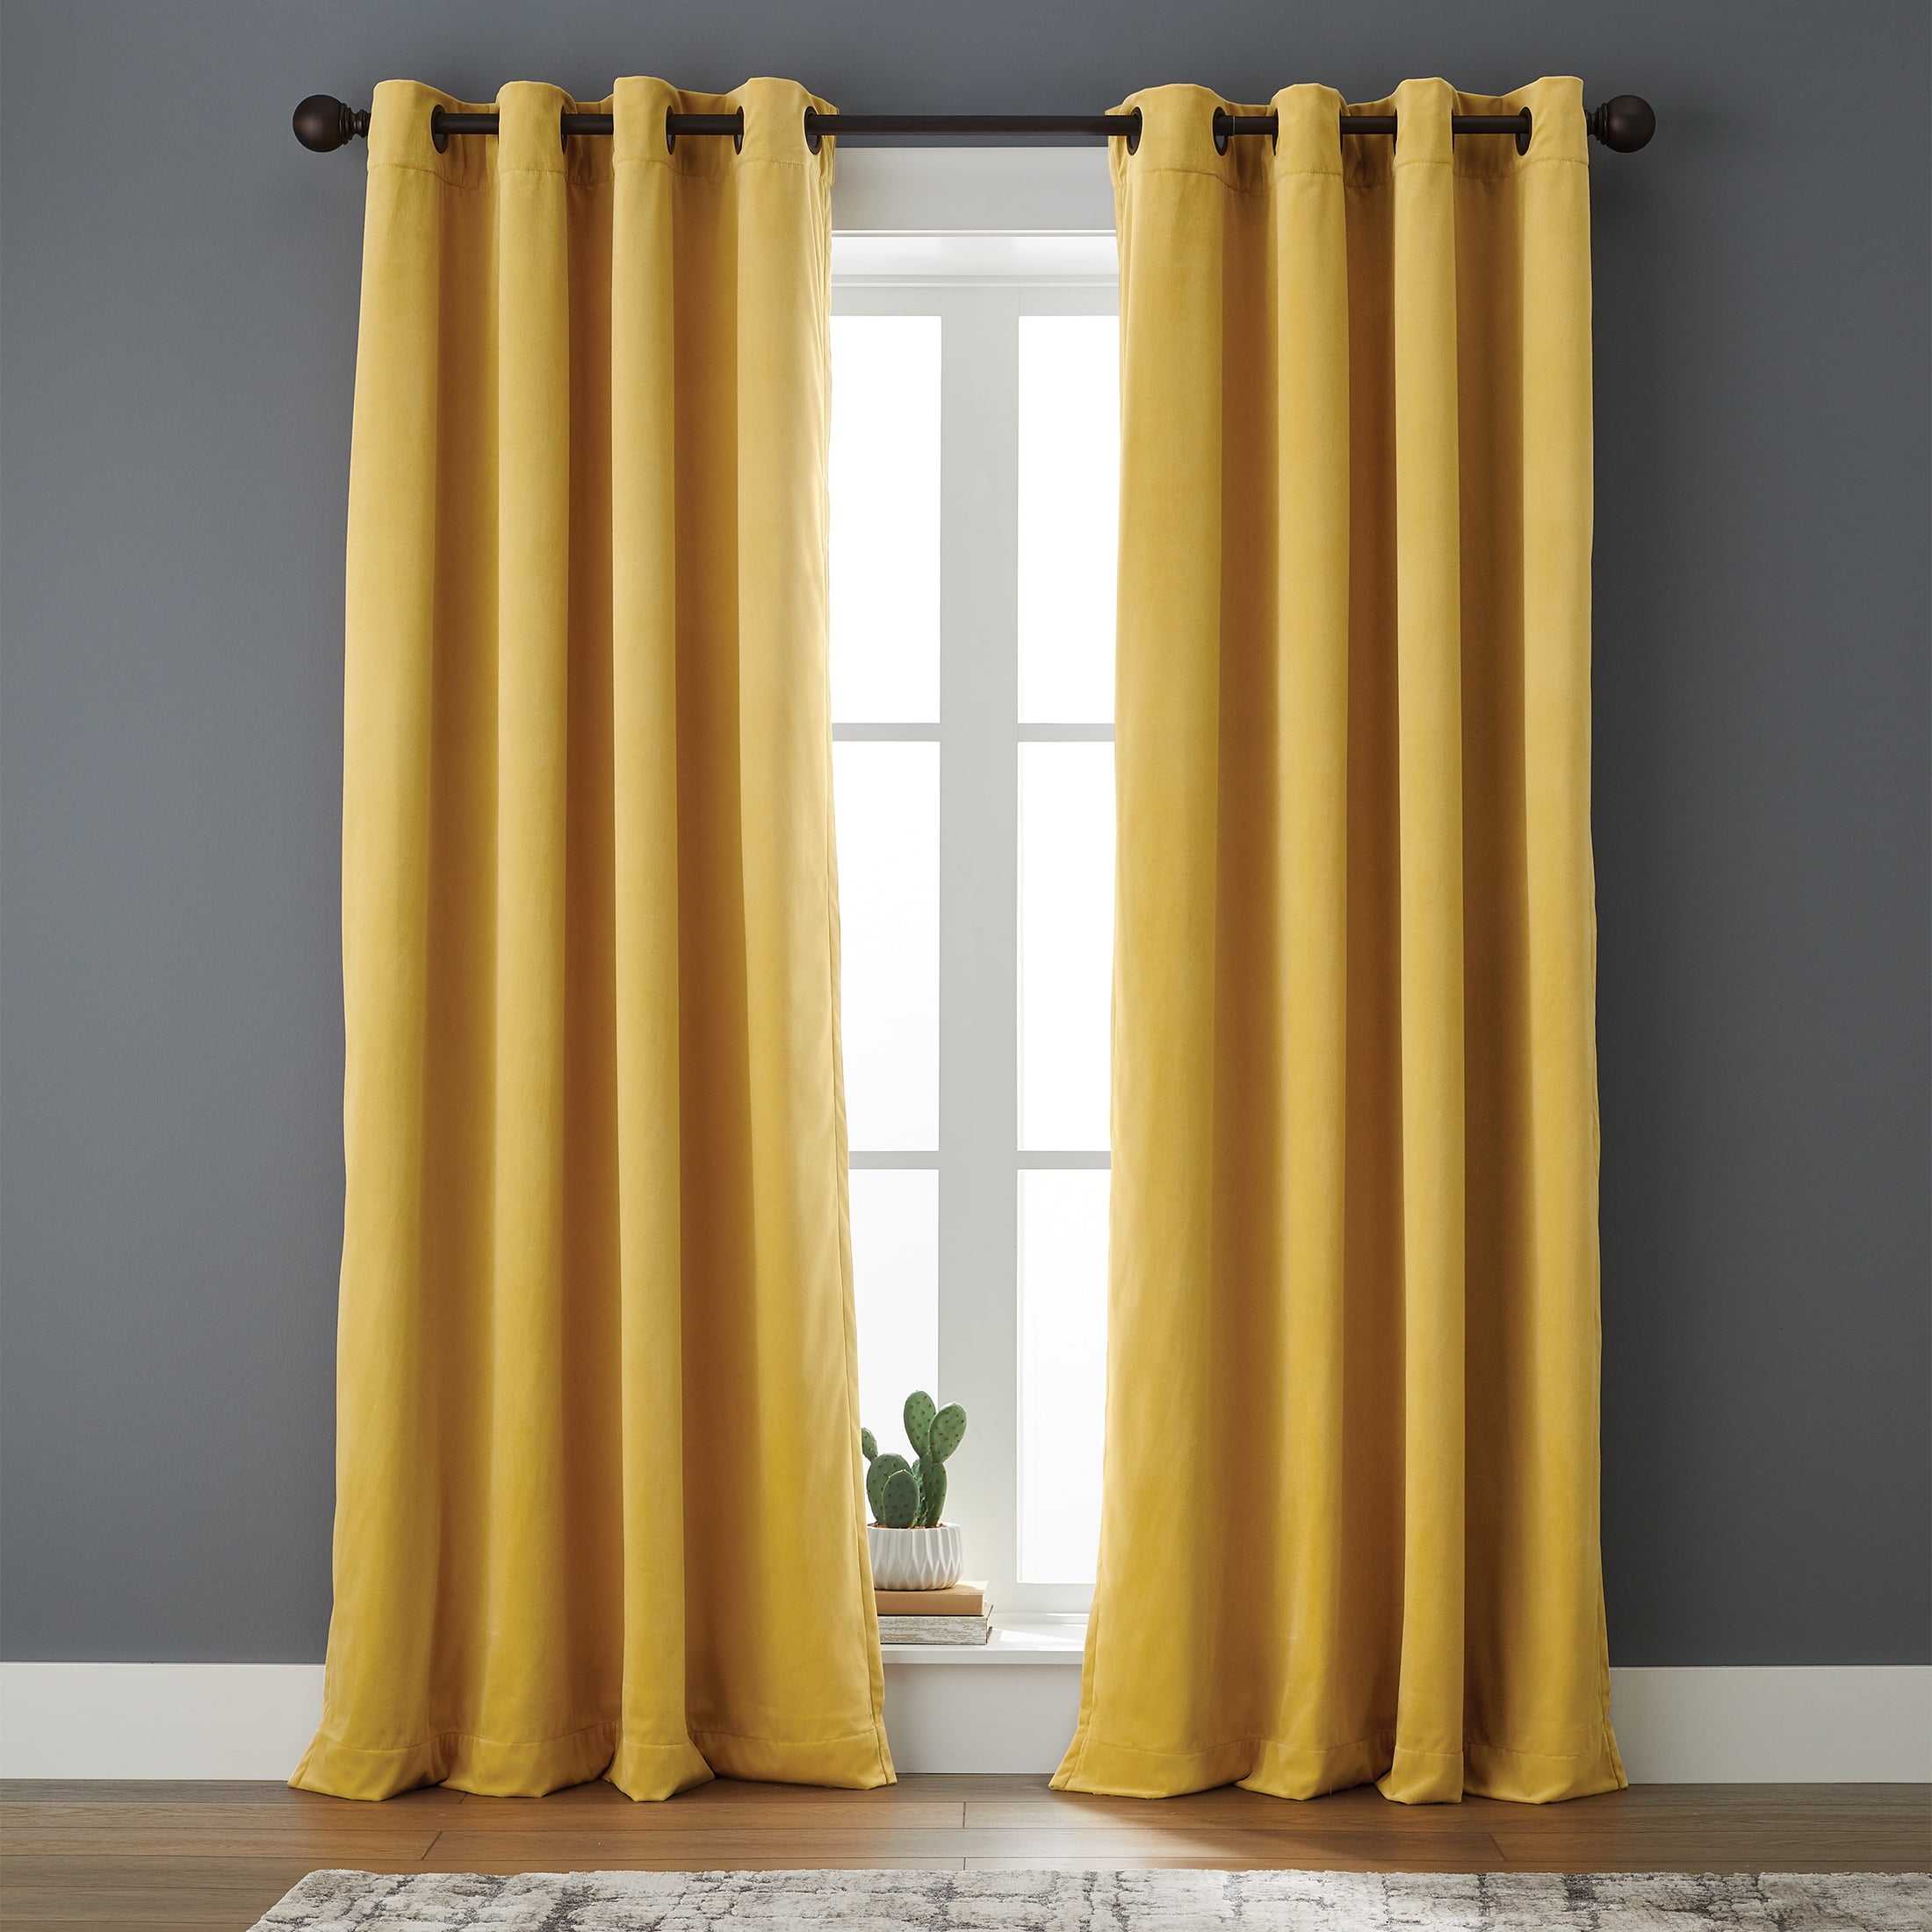 Custom Width by 84" H Solid Yellow Velvet Curtain Single Panel w/Rod Pocket Top 